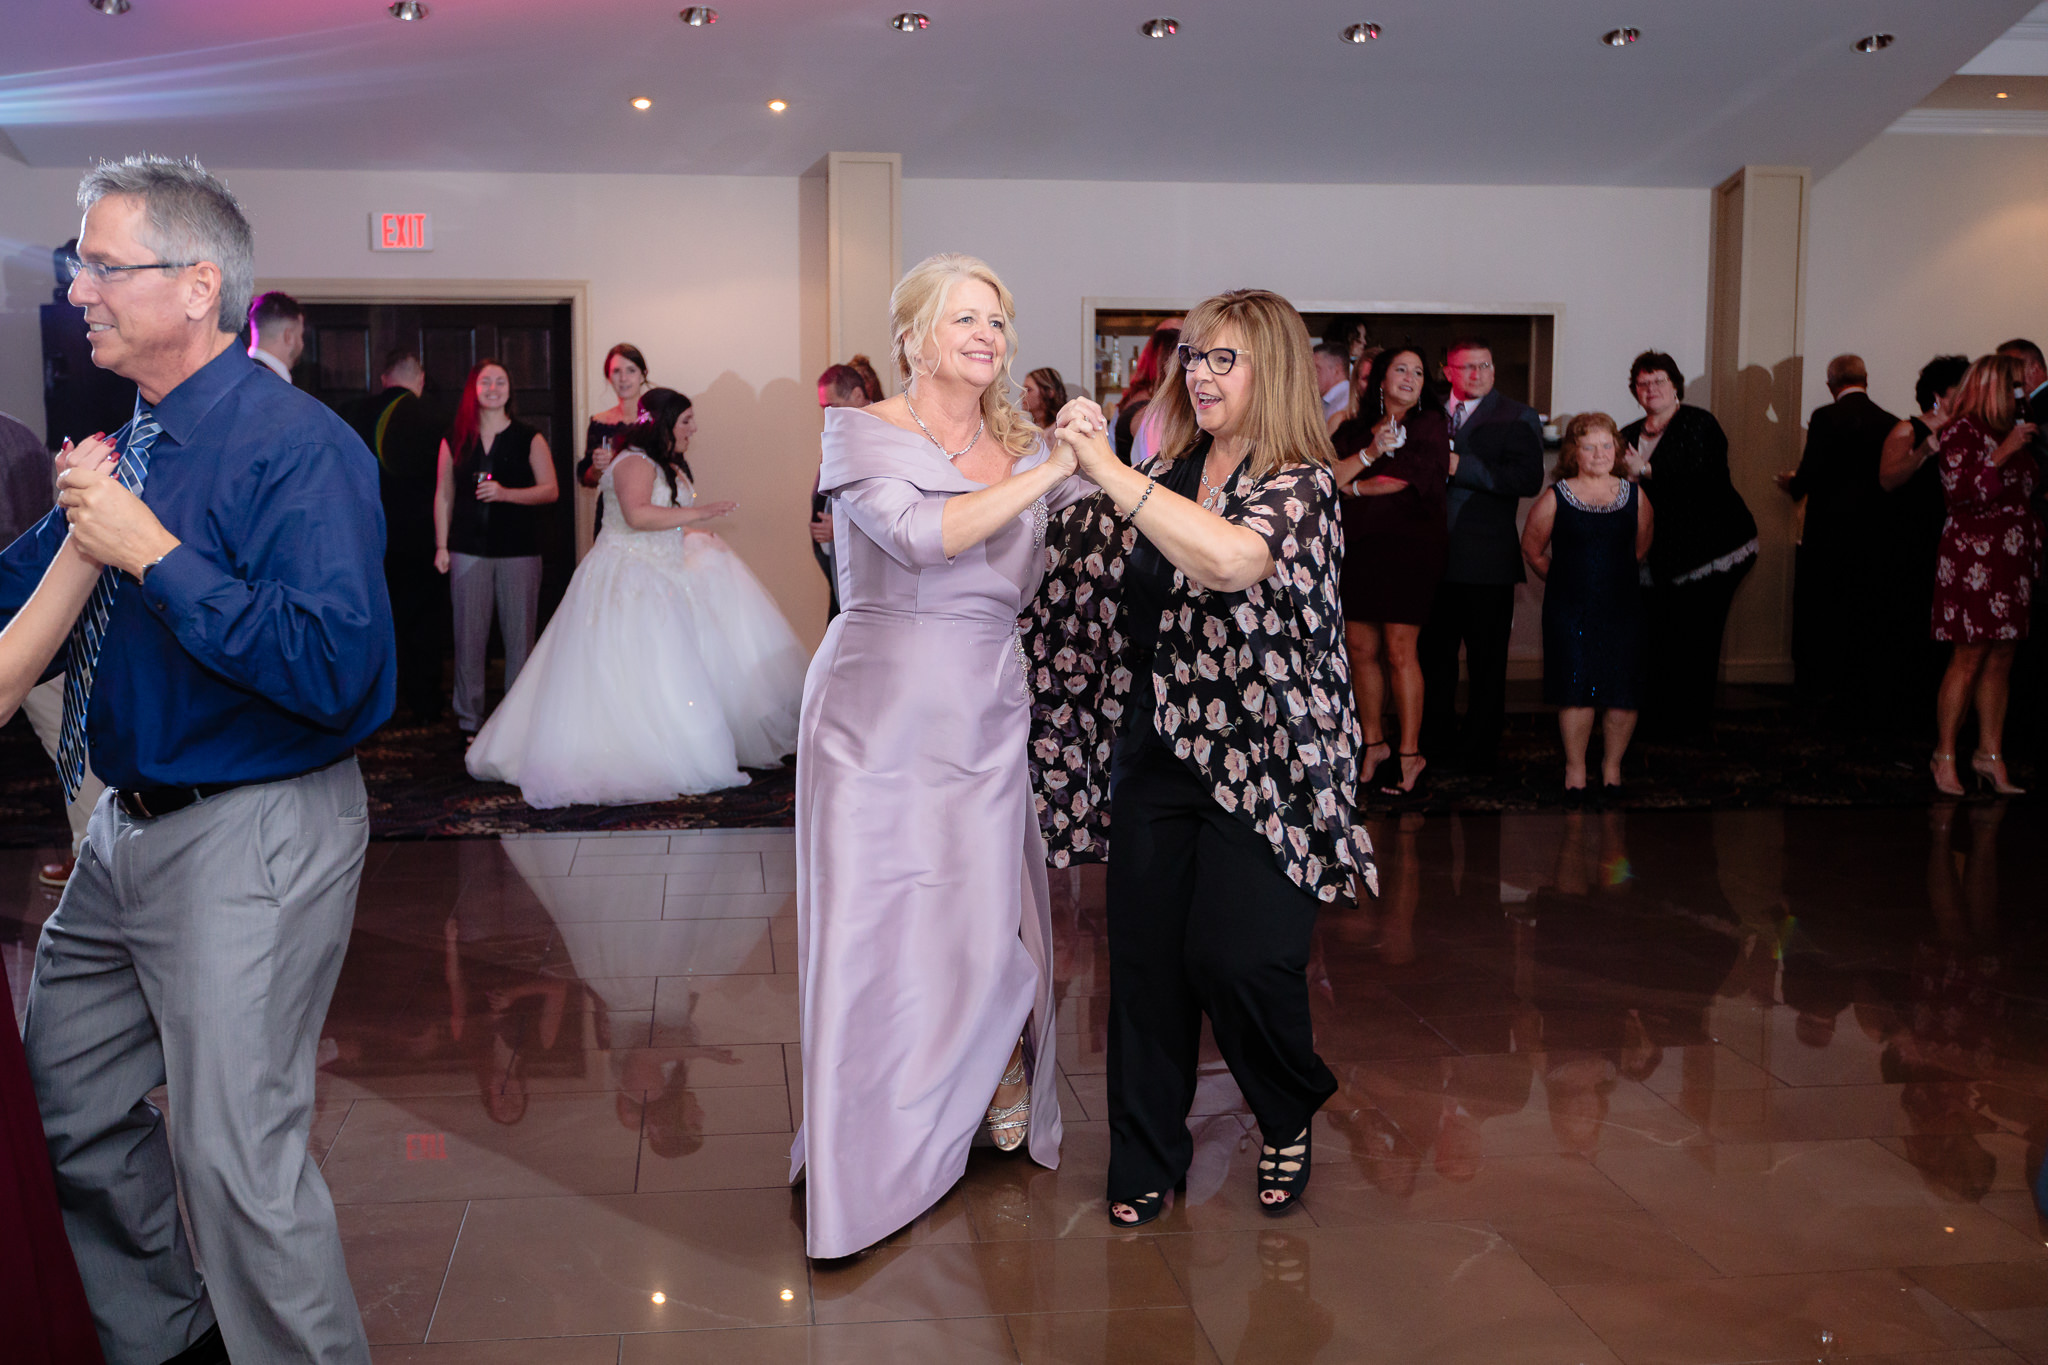 Mother of the groom dances the polka with her friend at the Fez